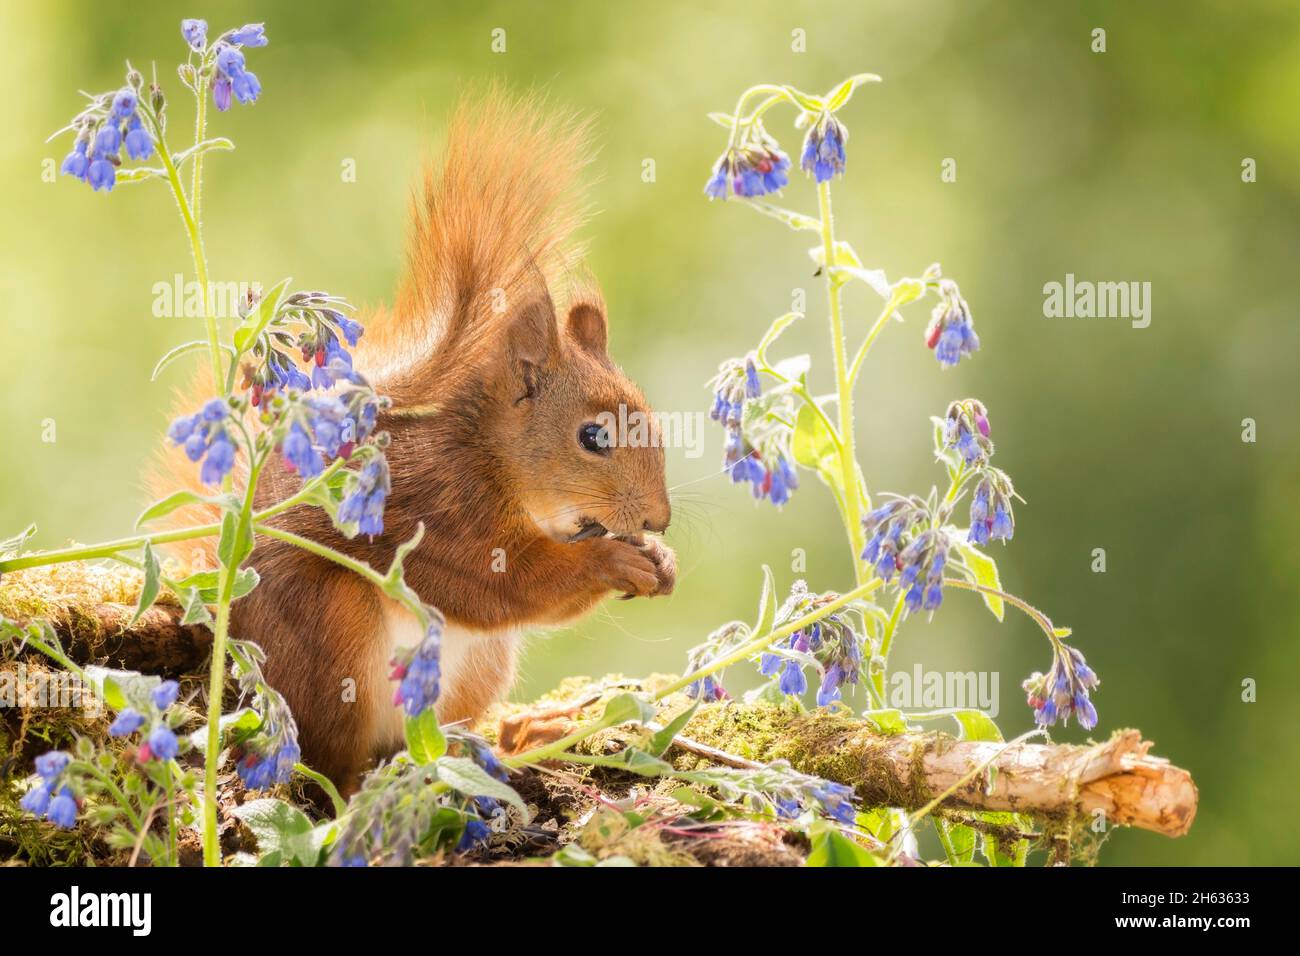 red squirrel standing with blue flowers in sunlight Stock Photo